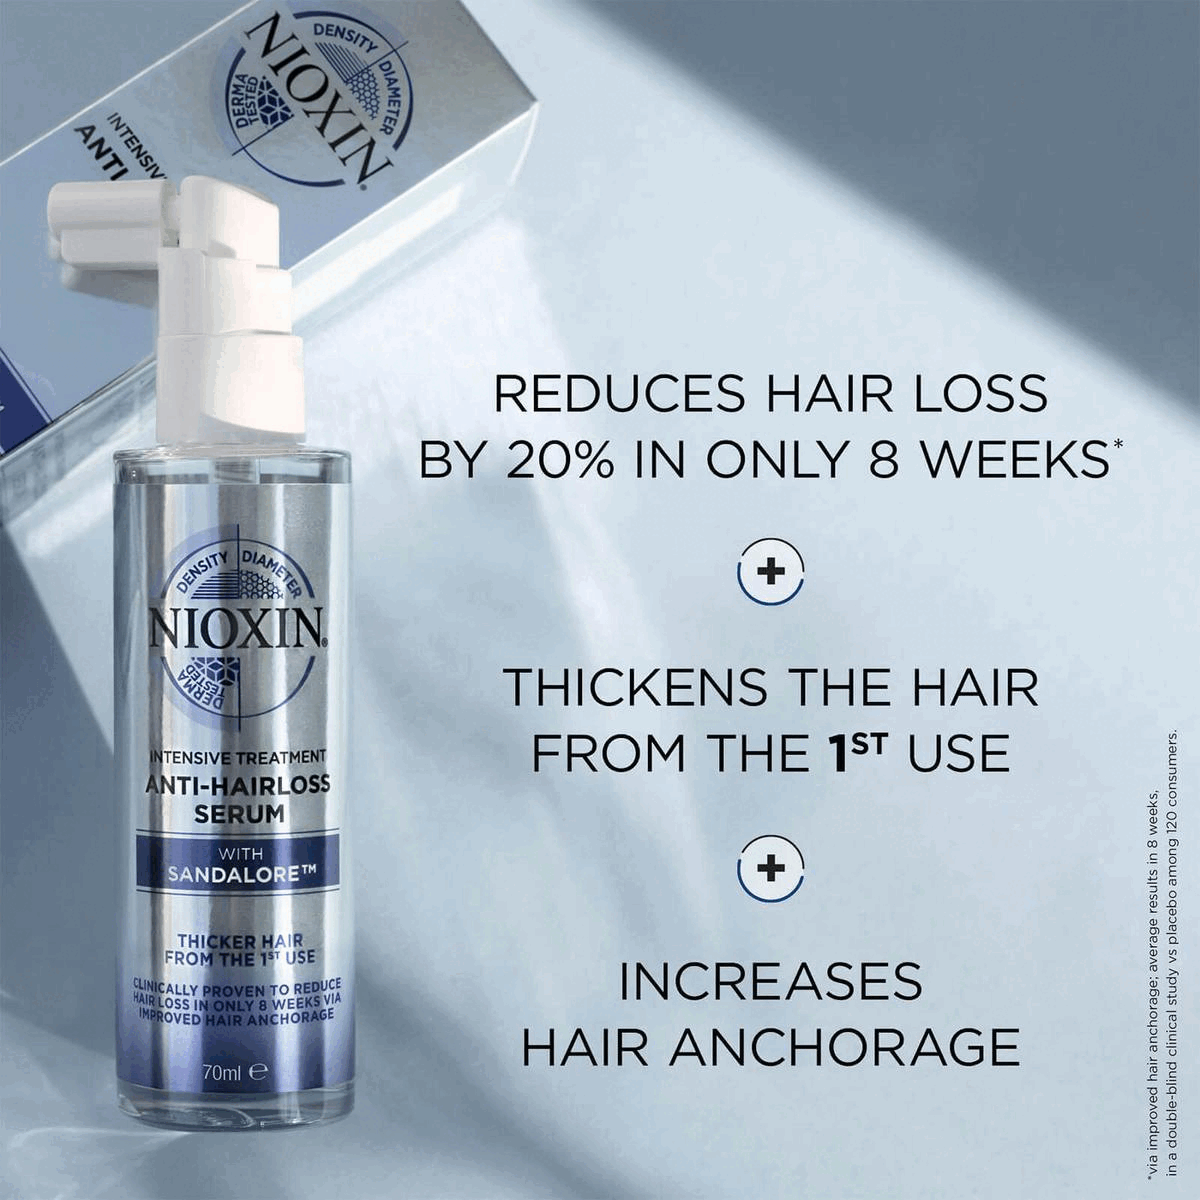 Image 1, Reduces hair loss by 20% in only 8 weeks + thickens the hair from the 1st use + increases hair anchorage. Image 2, Apply 12 to 15 pumps on scalp. Massage to distribute evenly. Do not rinse.. Image 3, Daily use 8 weeks